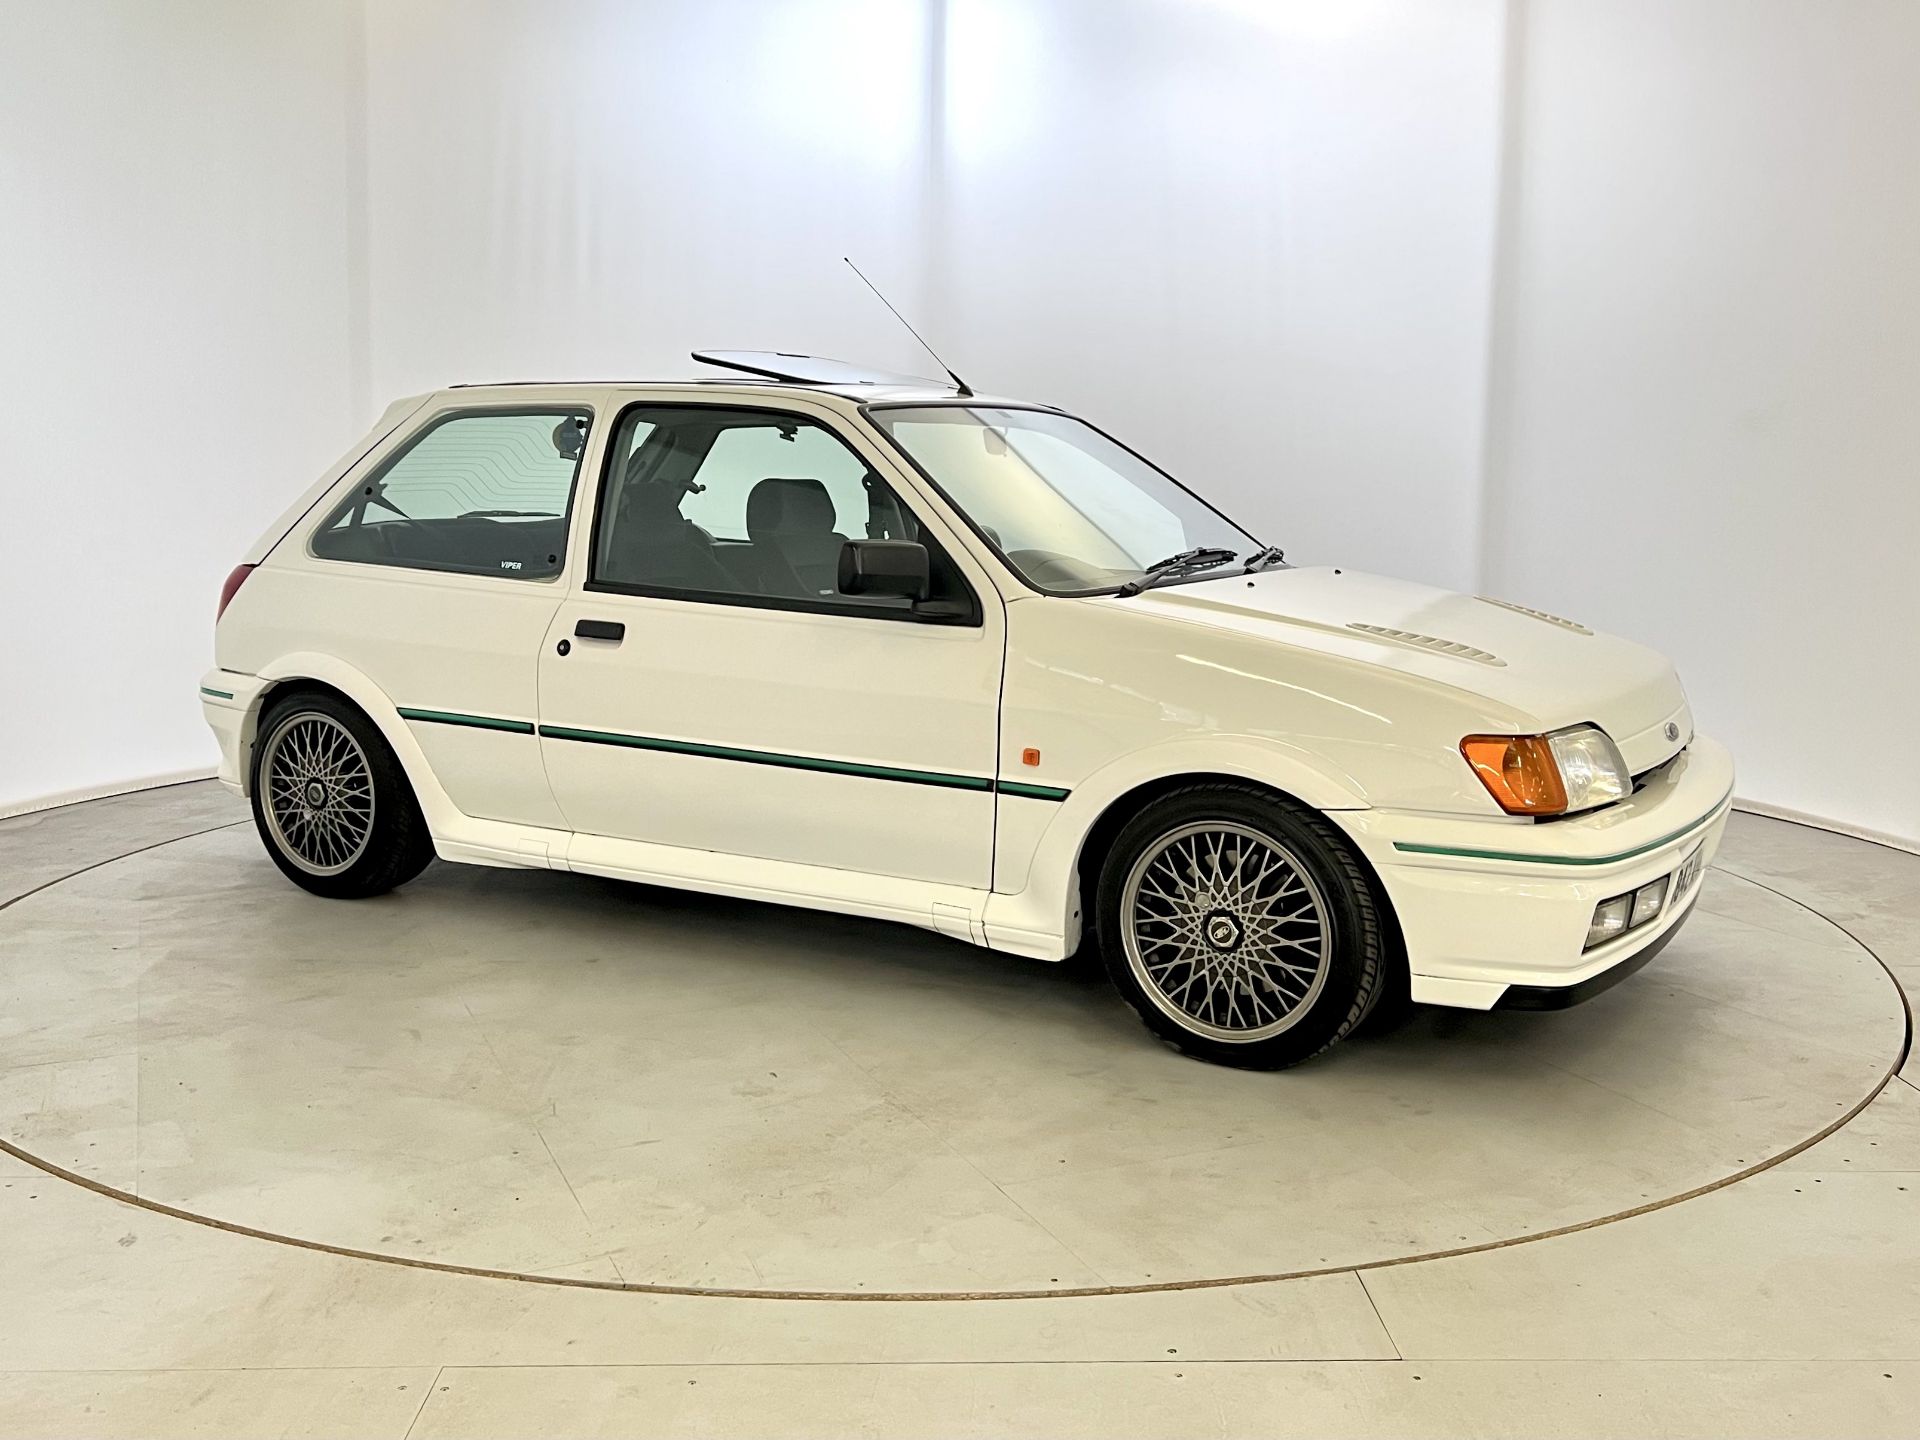 Ford Fiesta RS Turbo - Image 12 of 26